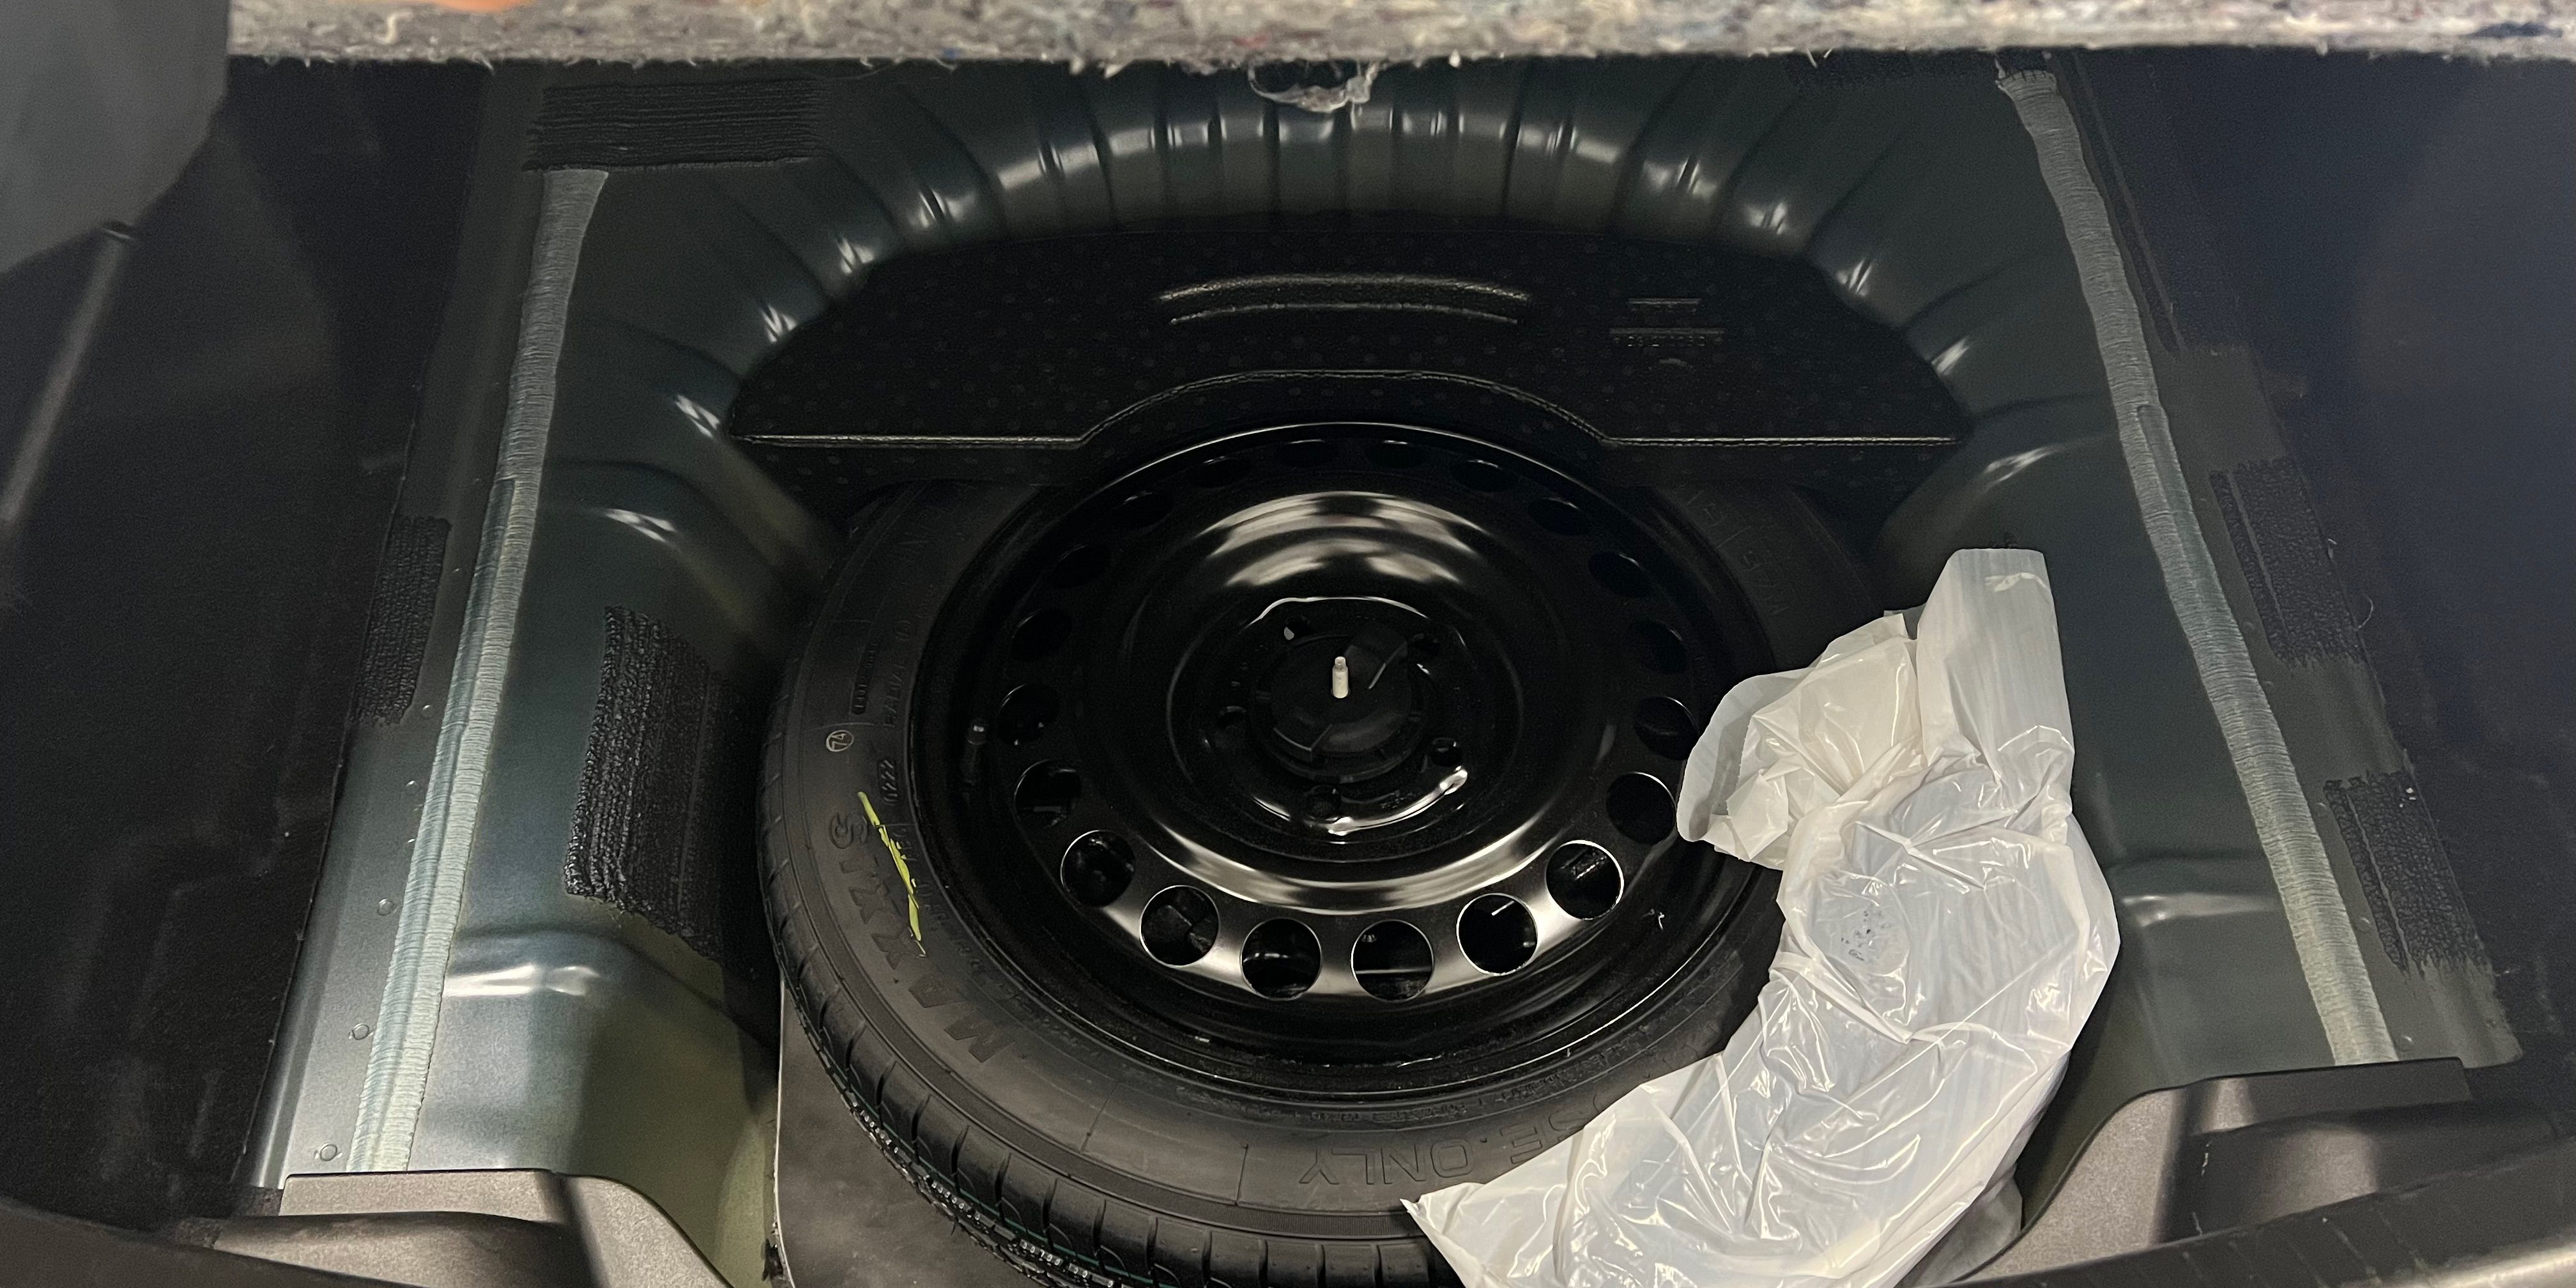 spare tire image with cat hidden image